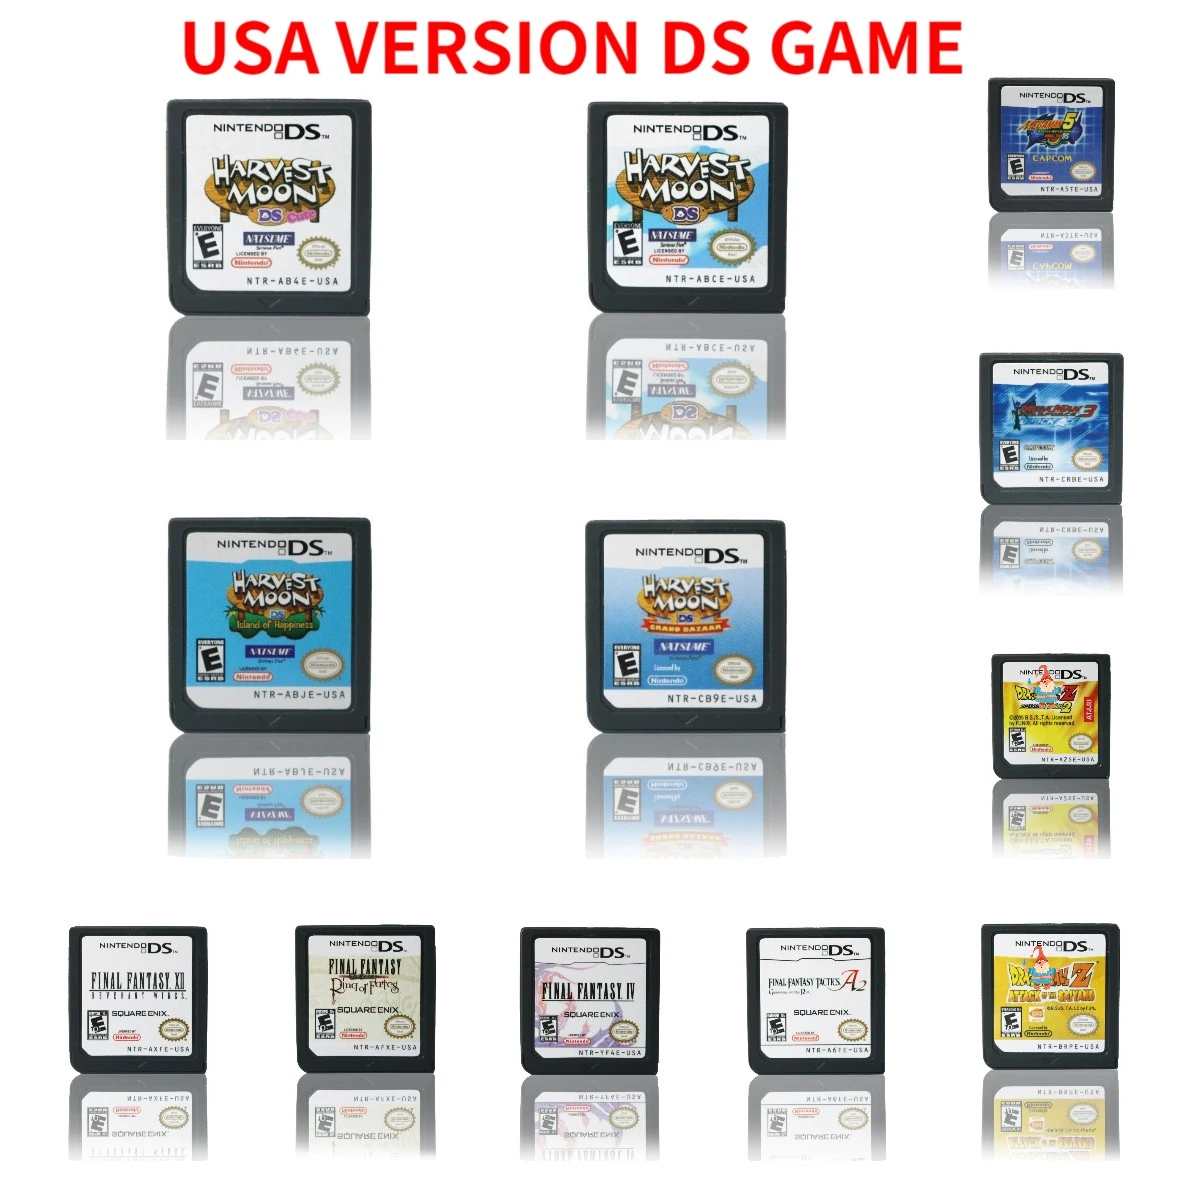 

USA Version Final Fantasy Attack of the Saiyans Mega Man Harvest Moon DS Game Card For Nintendo DS 3DS 2DS XL Console